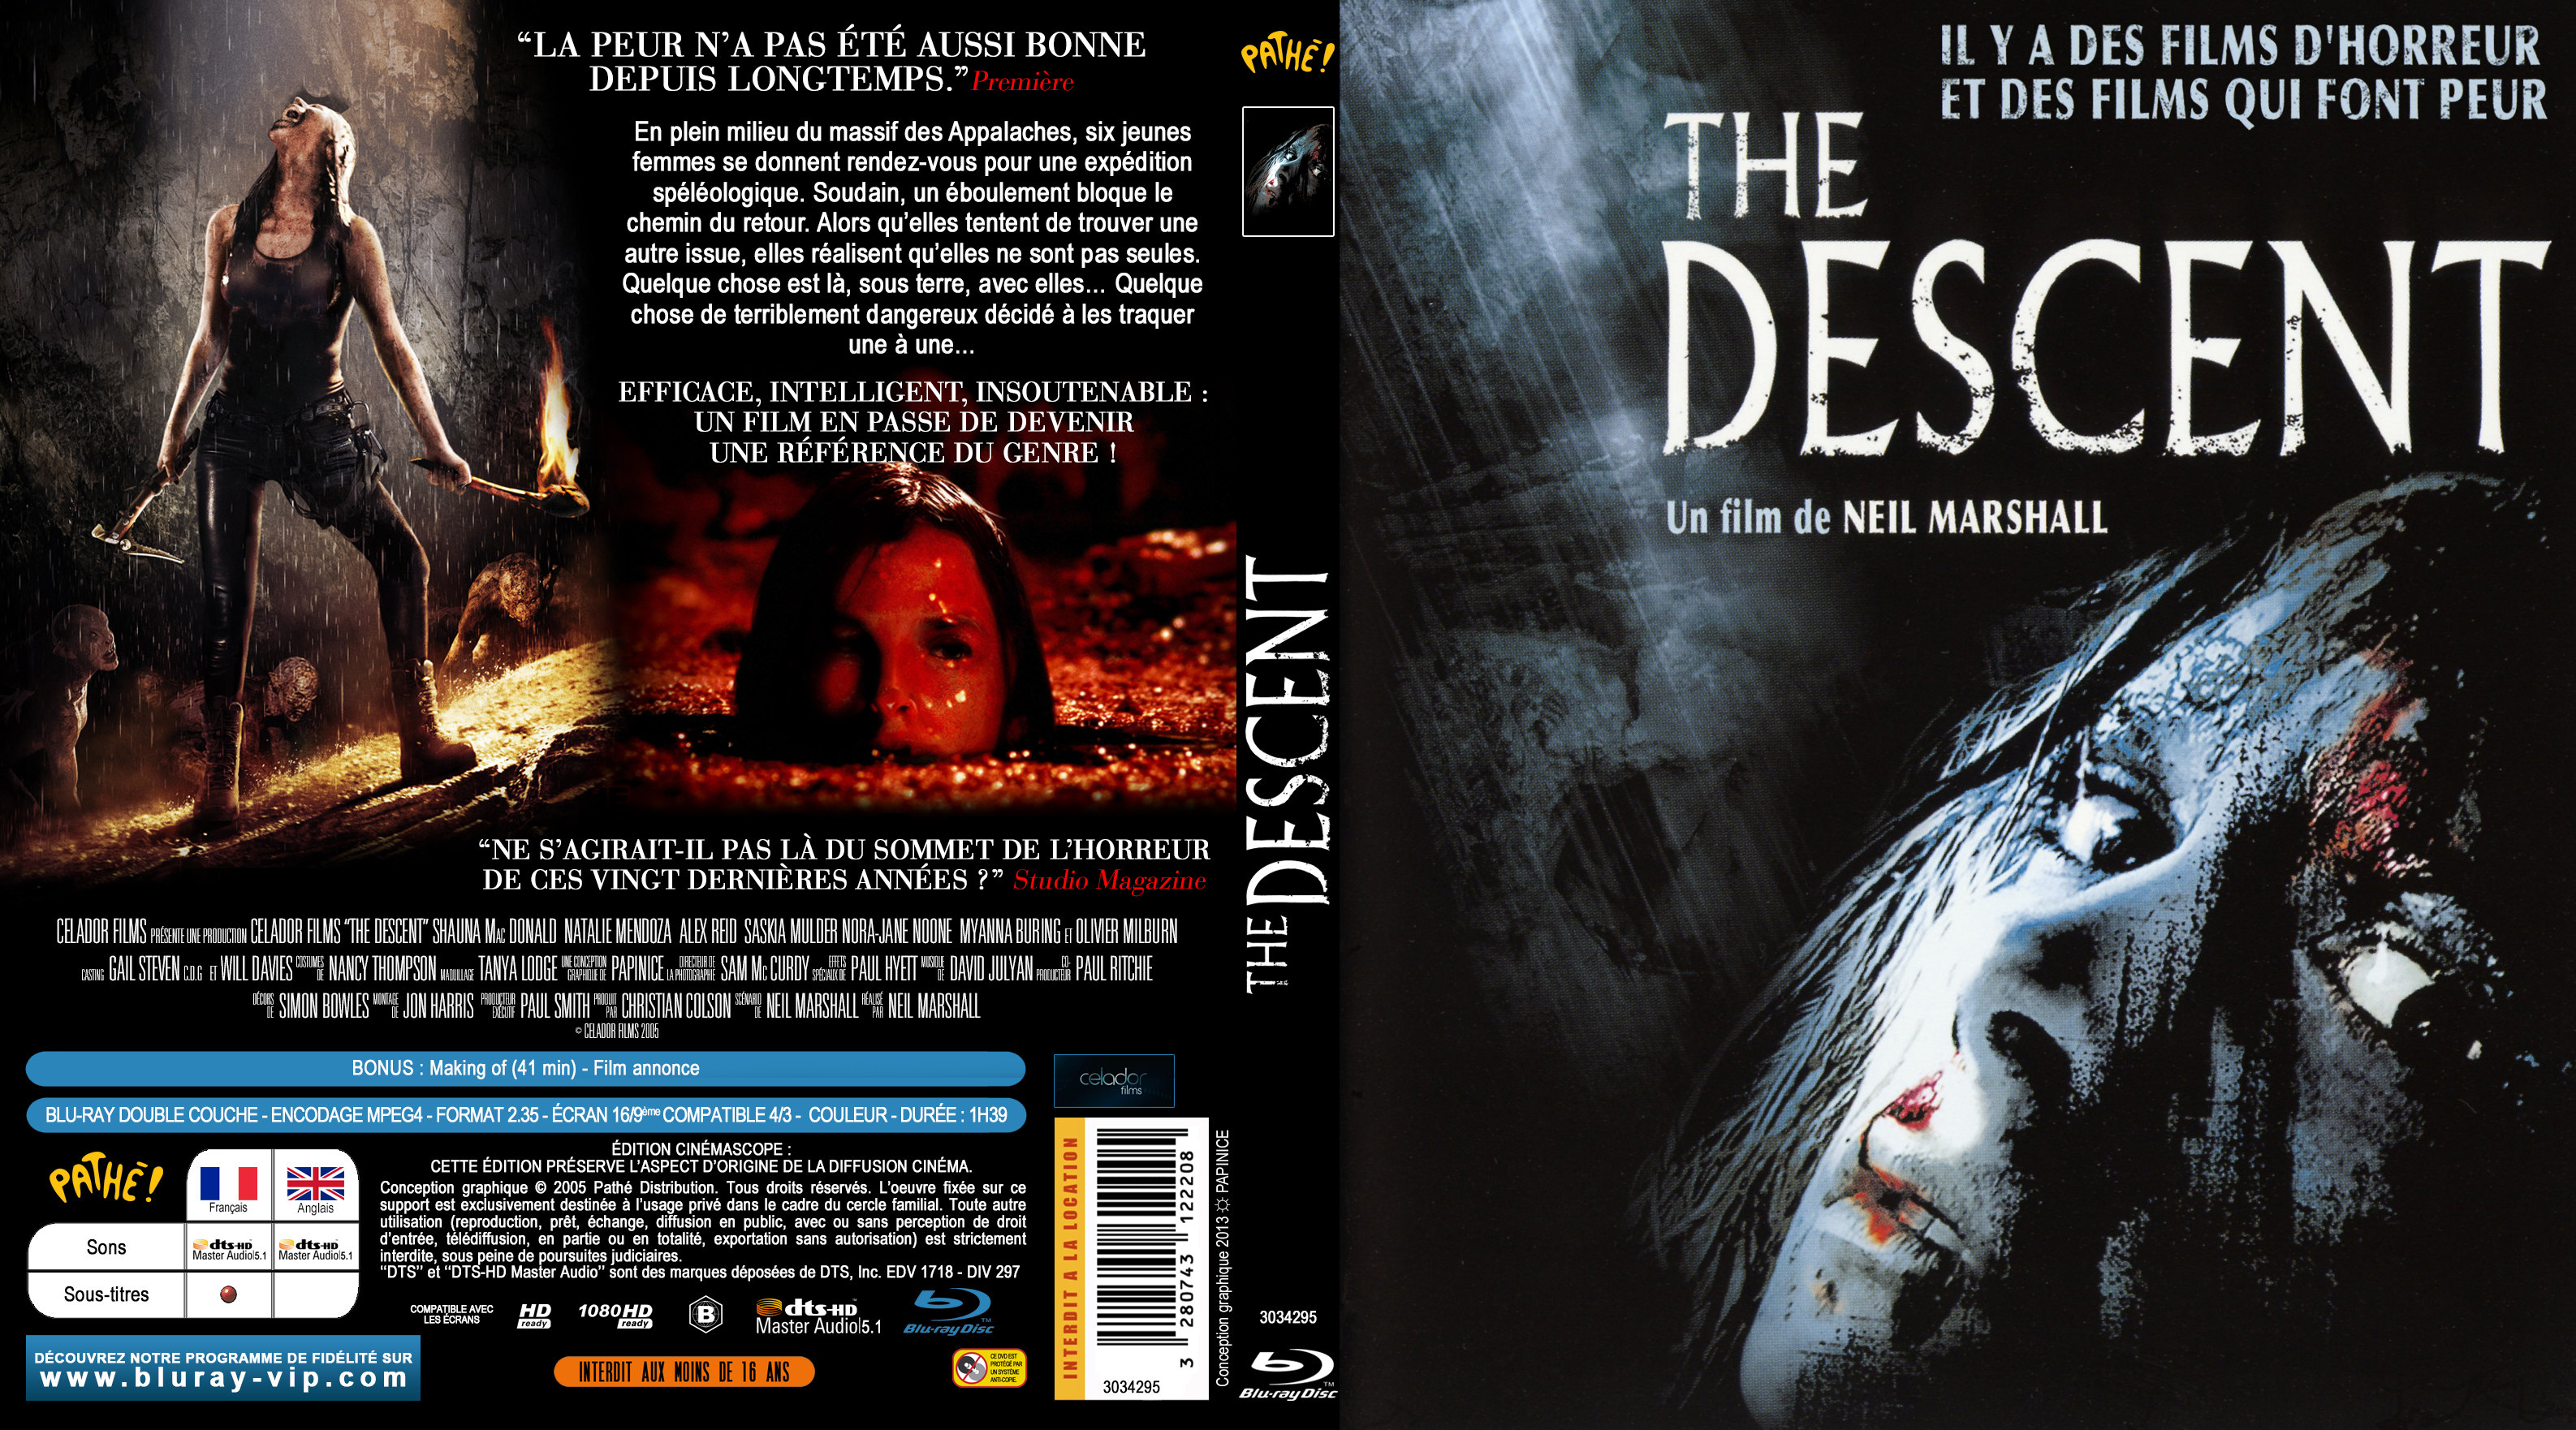 Jaquette DVD The descent custom (BLU-RAY)